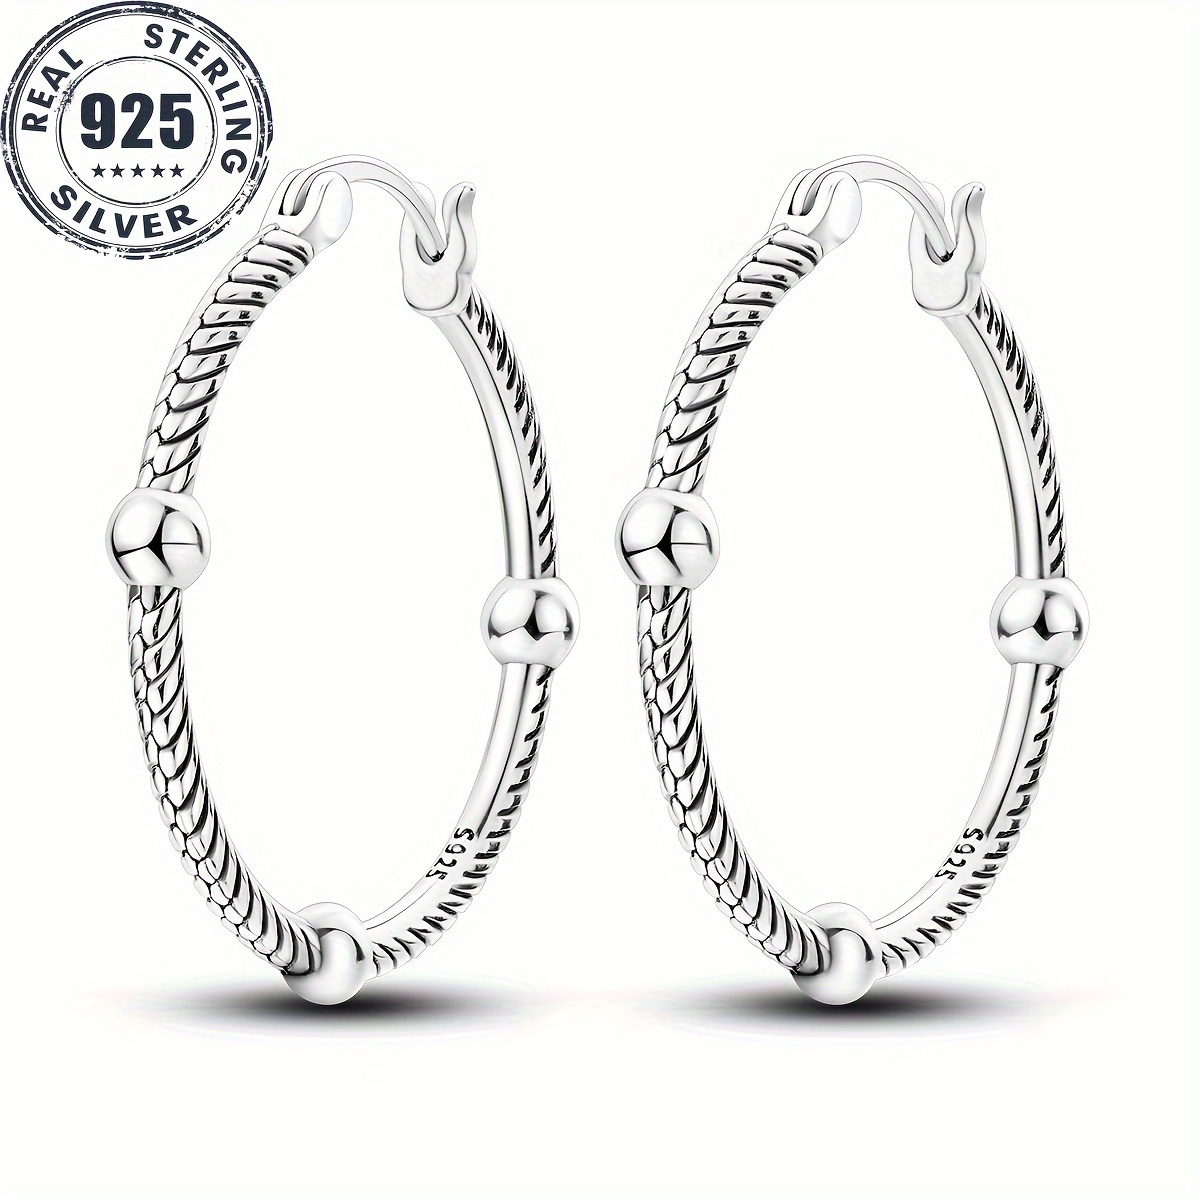 

4.2g 925 Sterling Silver 3 Ball Snake Bone Pattern Ear Buckle Earrings Charms For Women Fashion Accessories Holiday Gift Fine Jewelry 1 Pair Of Earrings